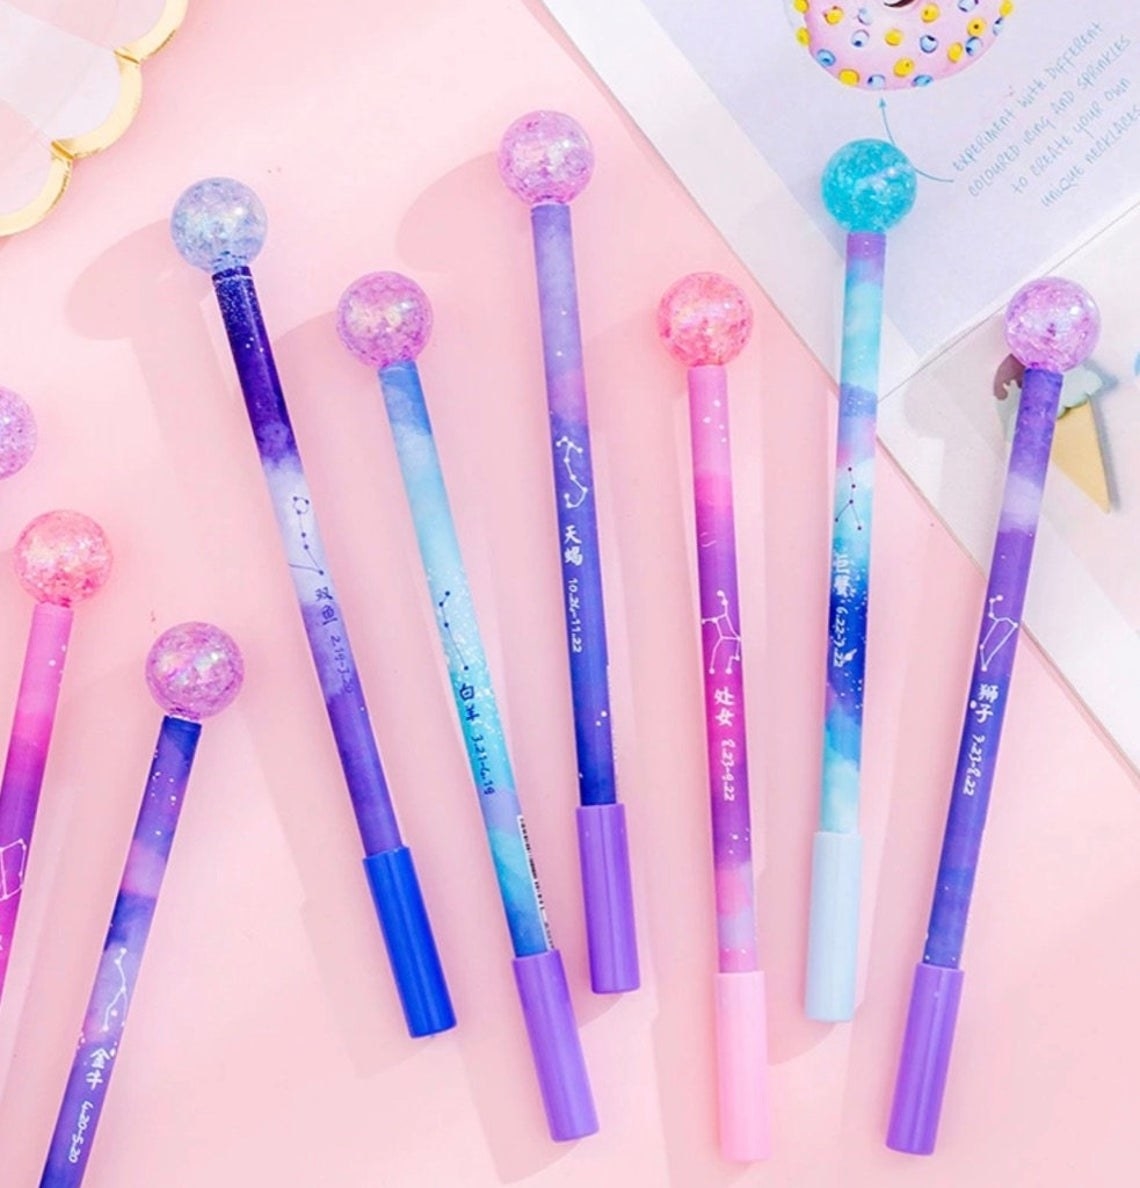 The pens, which have glittery balls on the top and are printed with galaxy and constellation patterns, in various colors. They all have caps